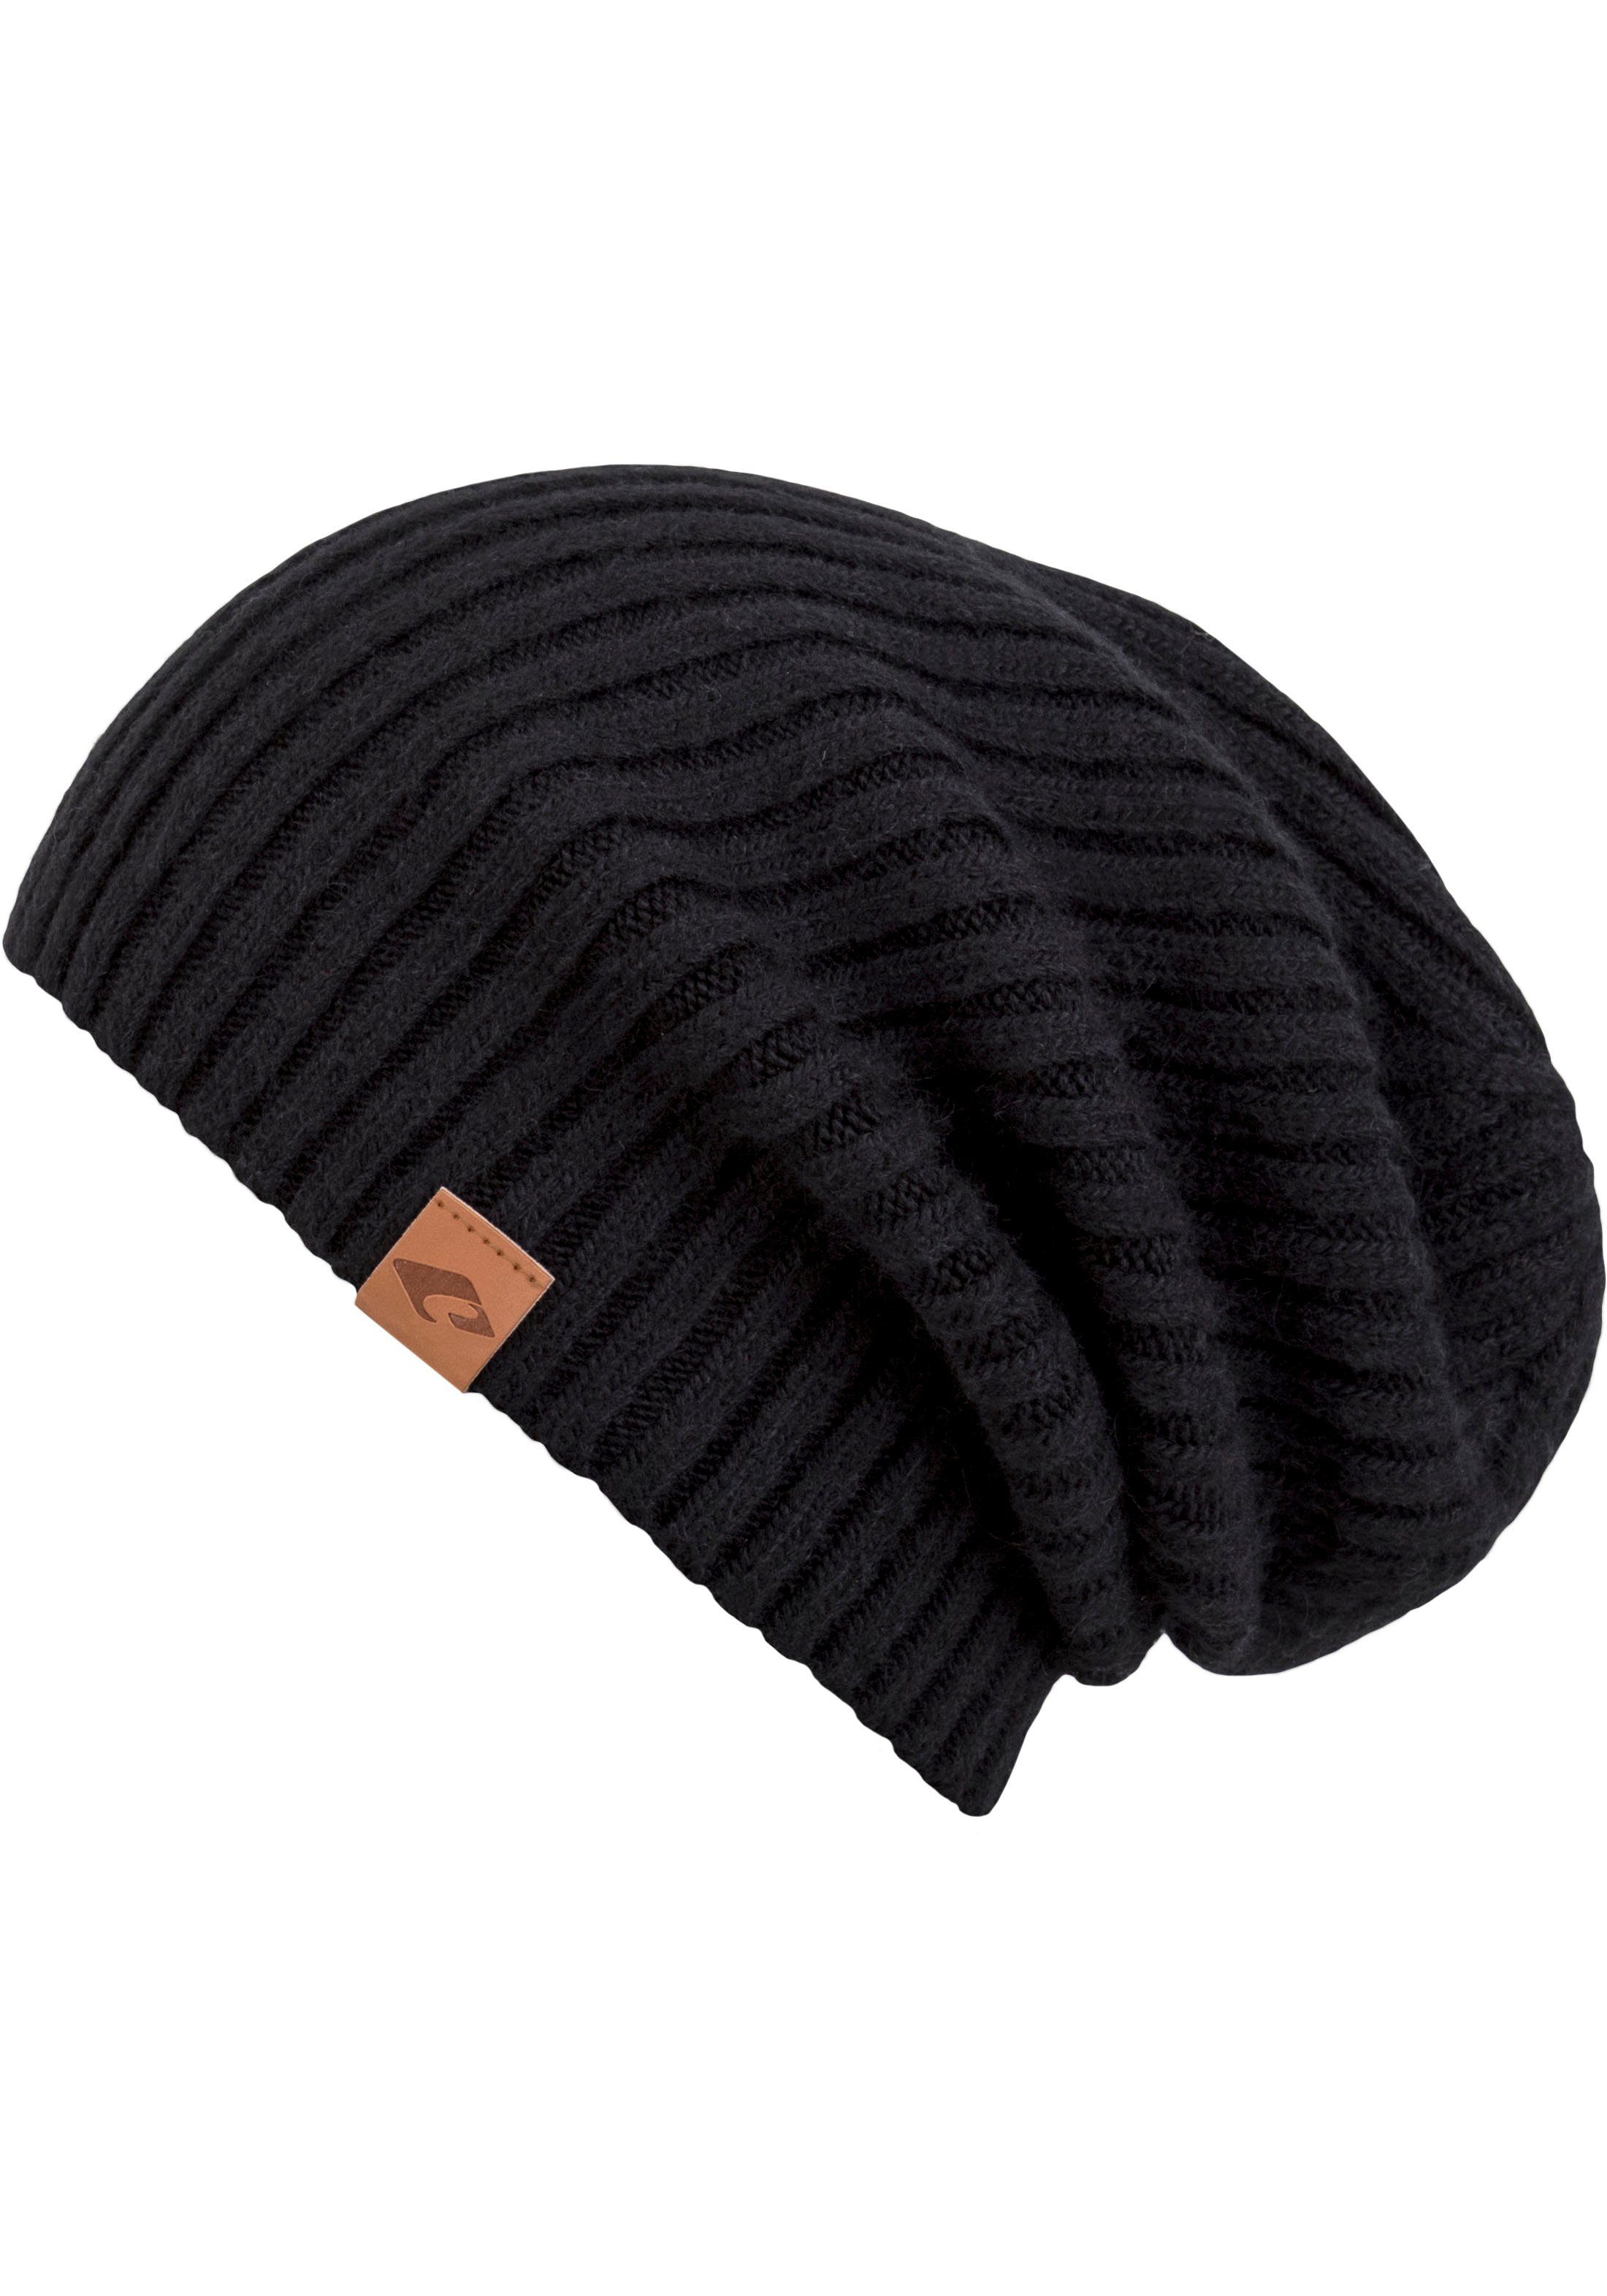 Hat Justin Beanie black chillouts